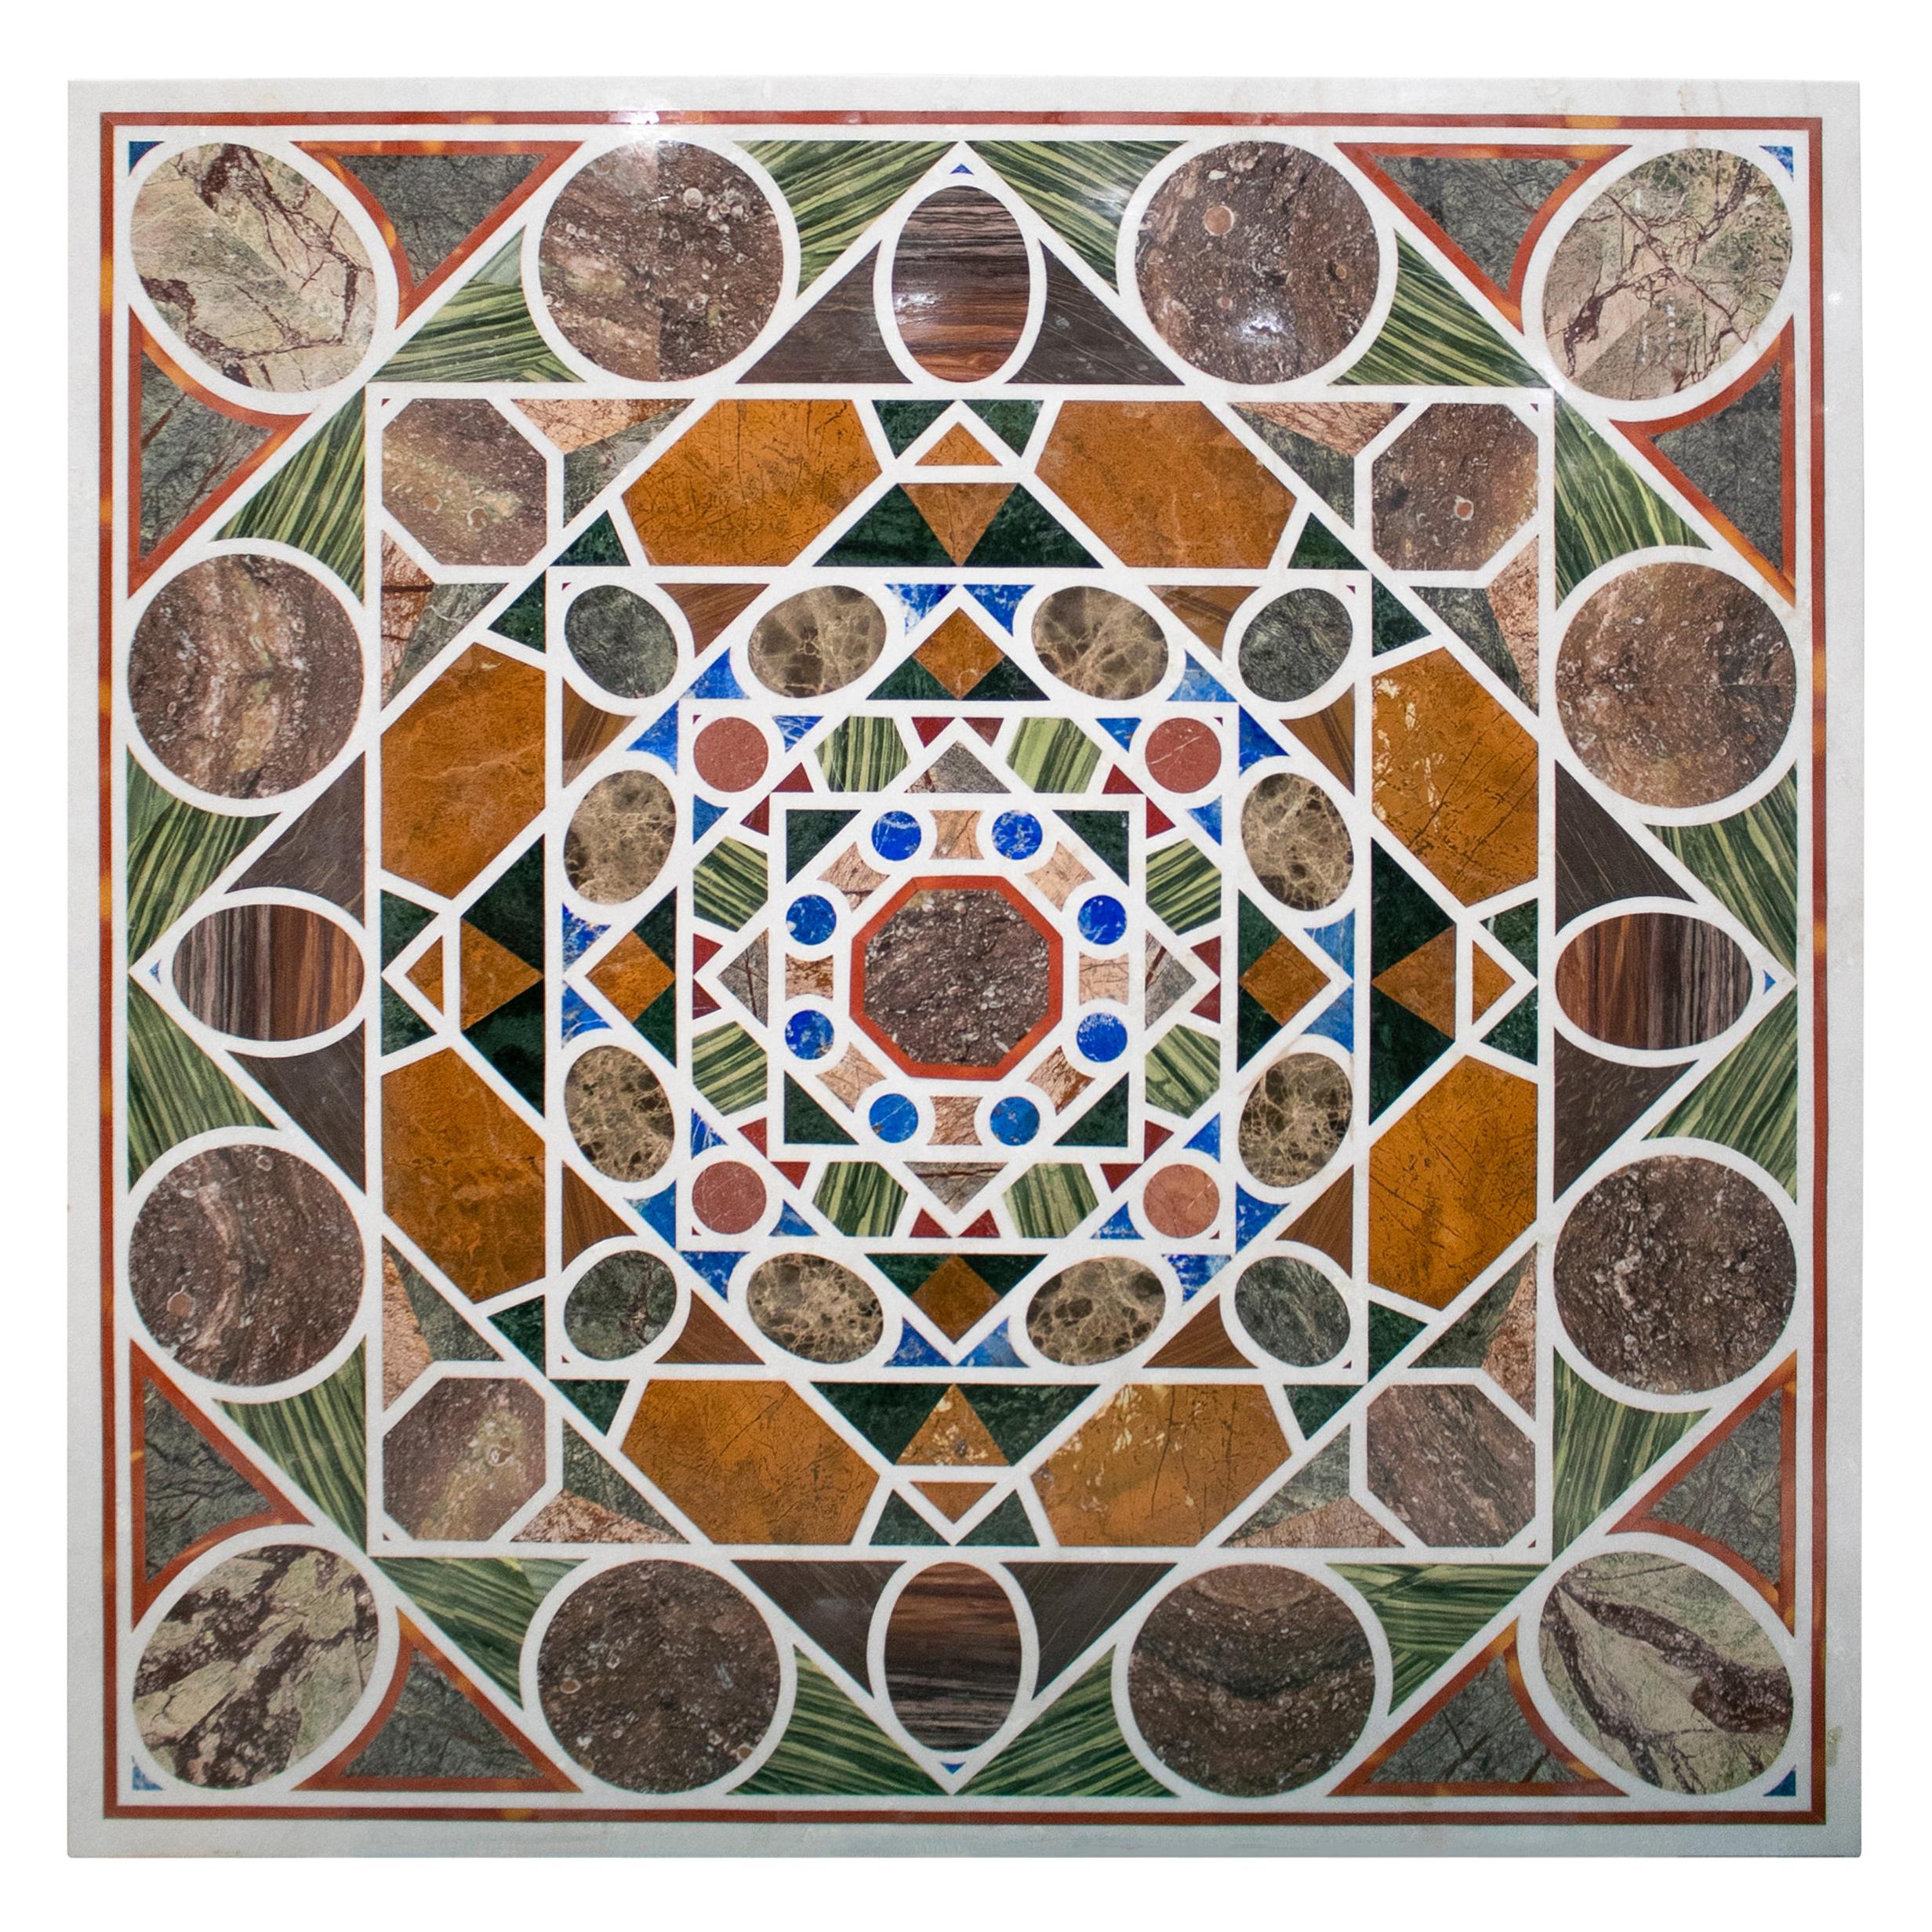 Square Pietre Dure White Marble and Lapis Geometric Mosaic Table Top